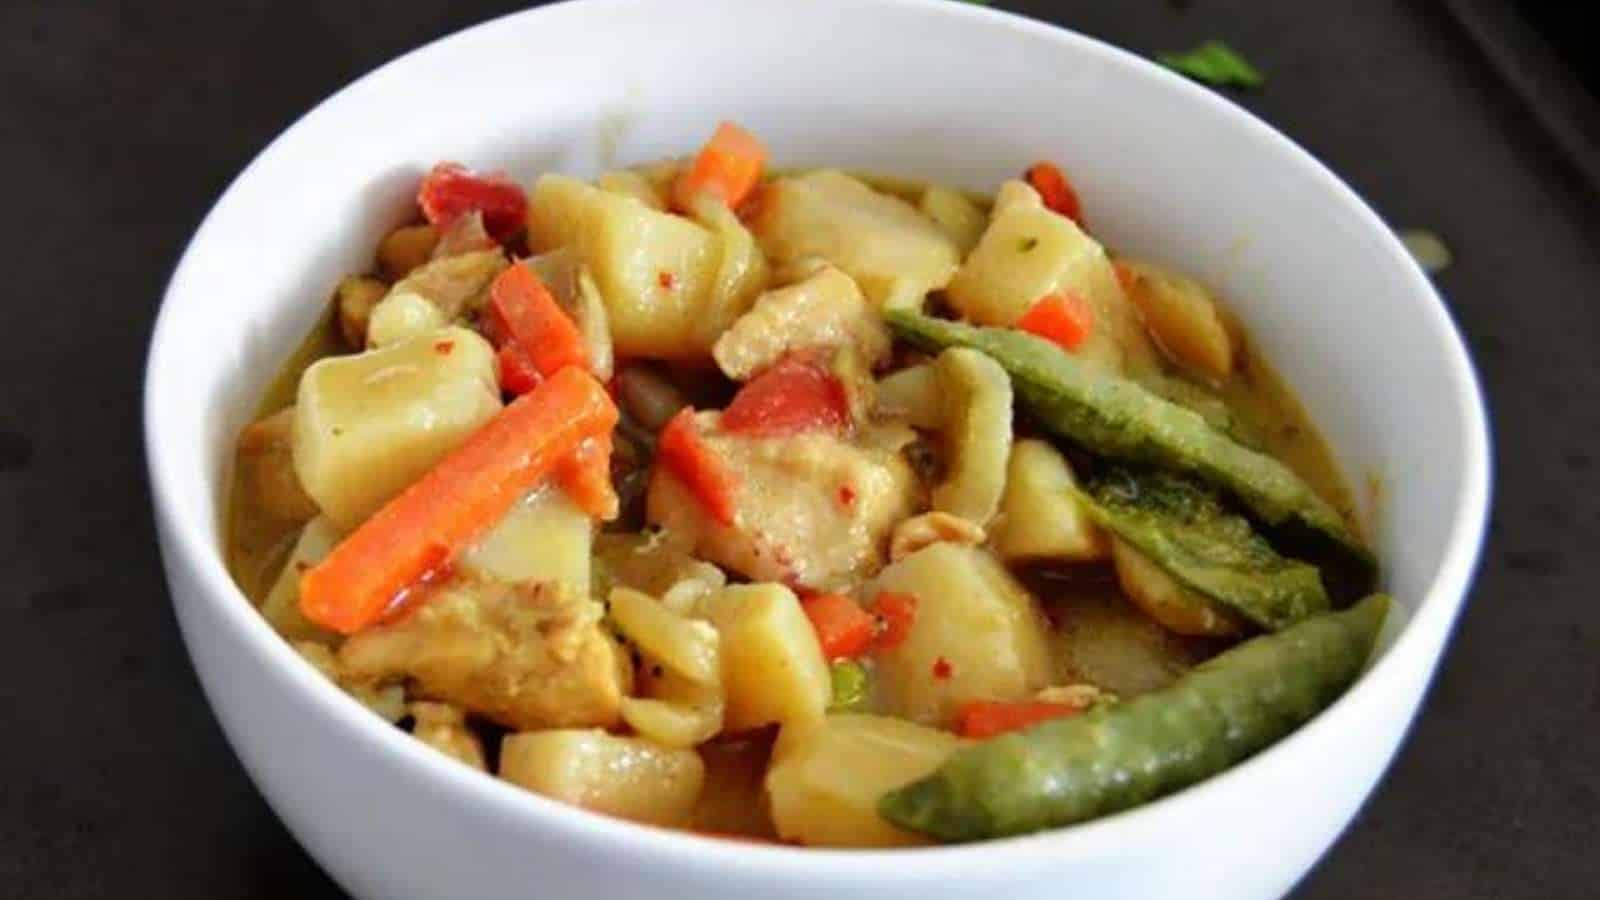 A bowl of chicken curry with vegetables and noodles.